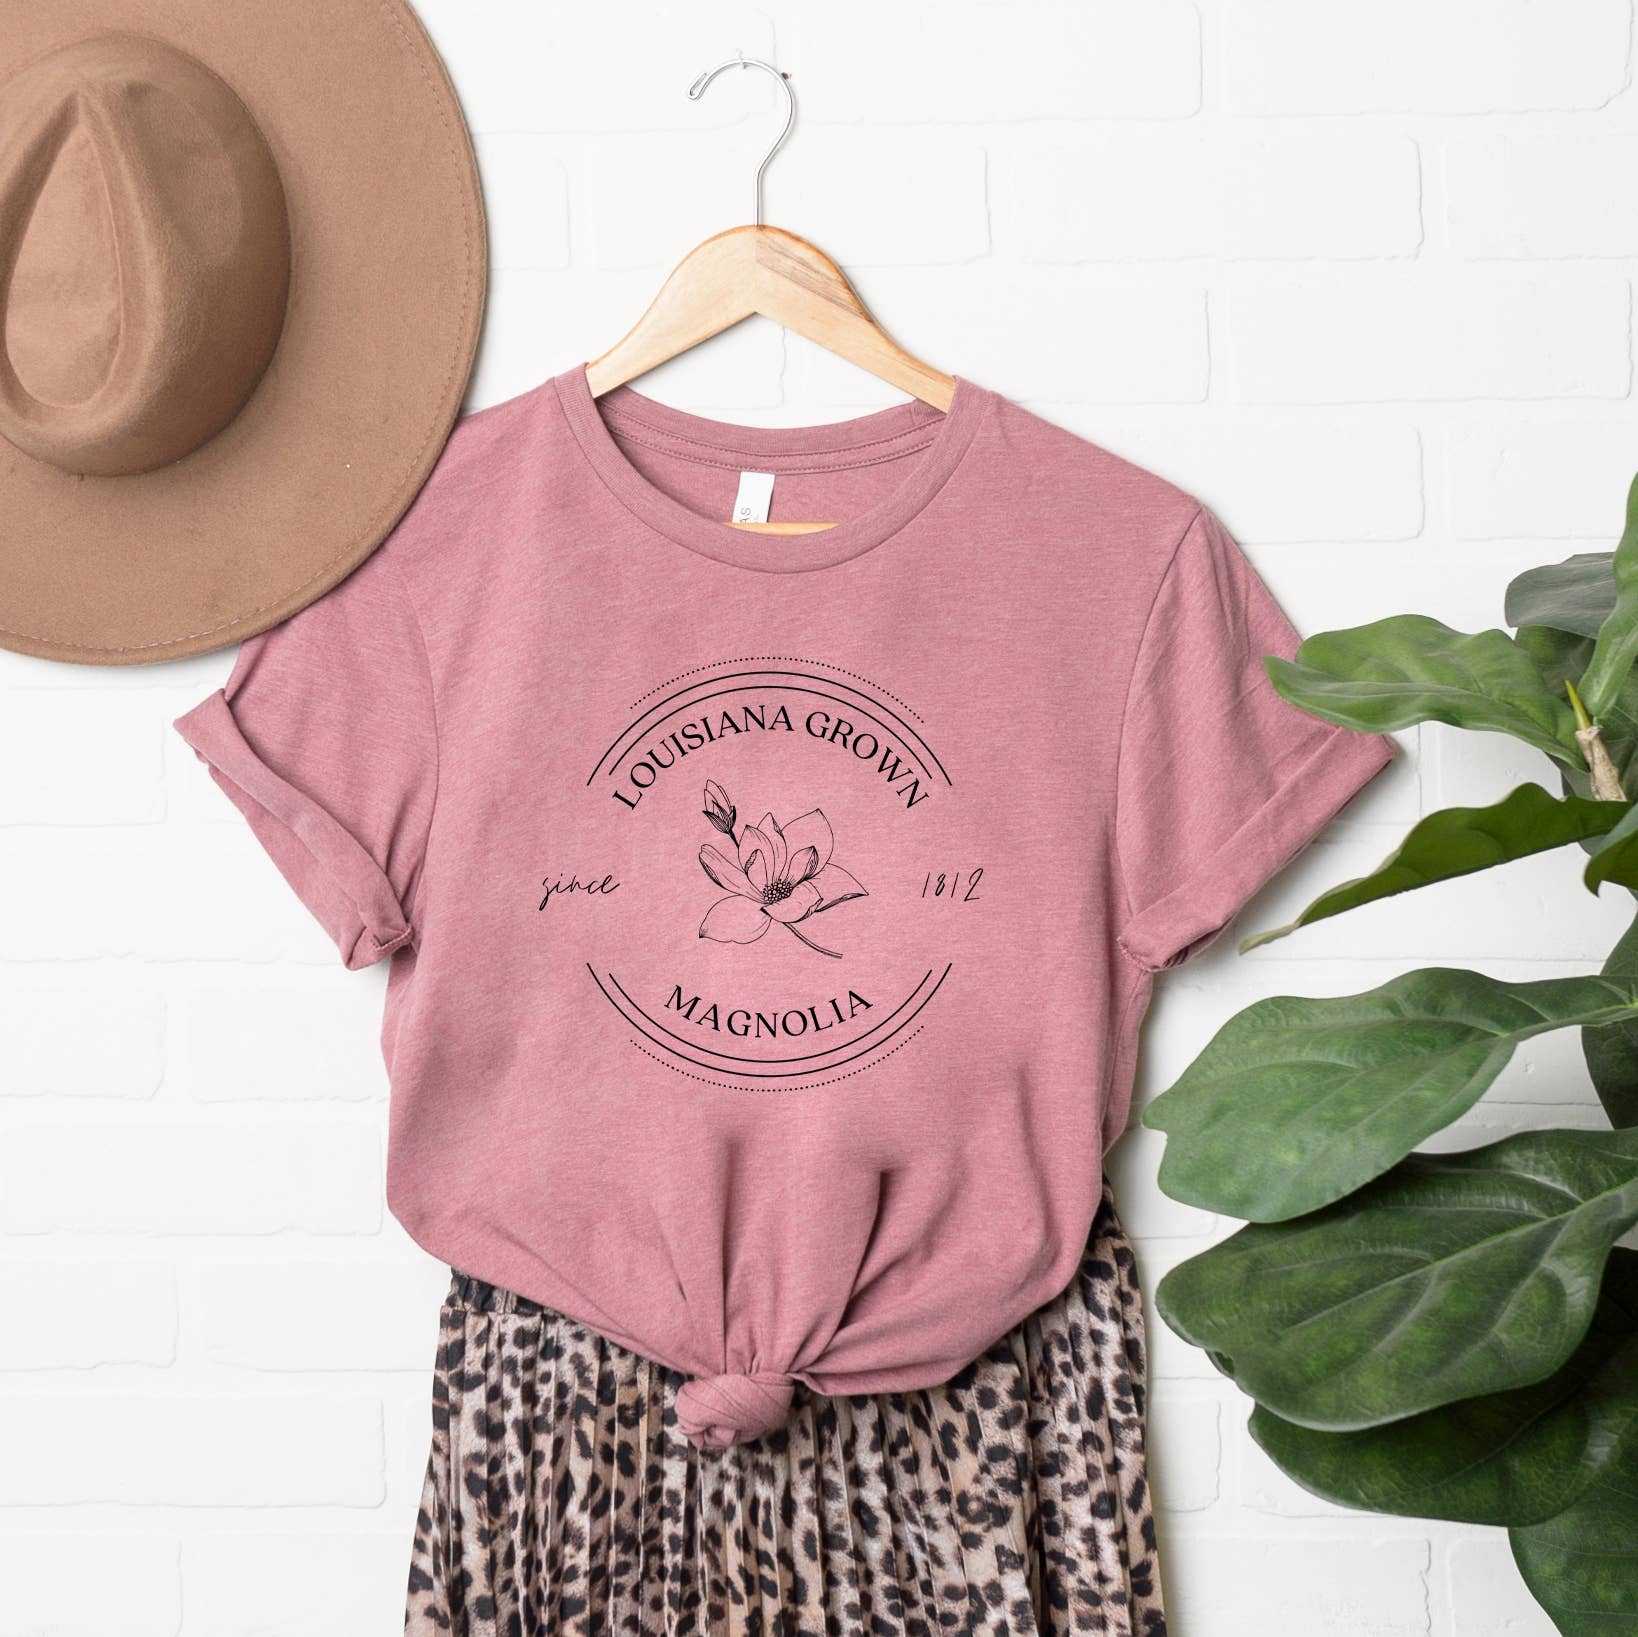 An Olive And Ivory Wholesale Louisiana State Flower Short Sleeve Graphic Tee and leopard print skirt with a hat.